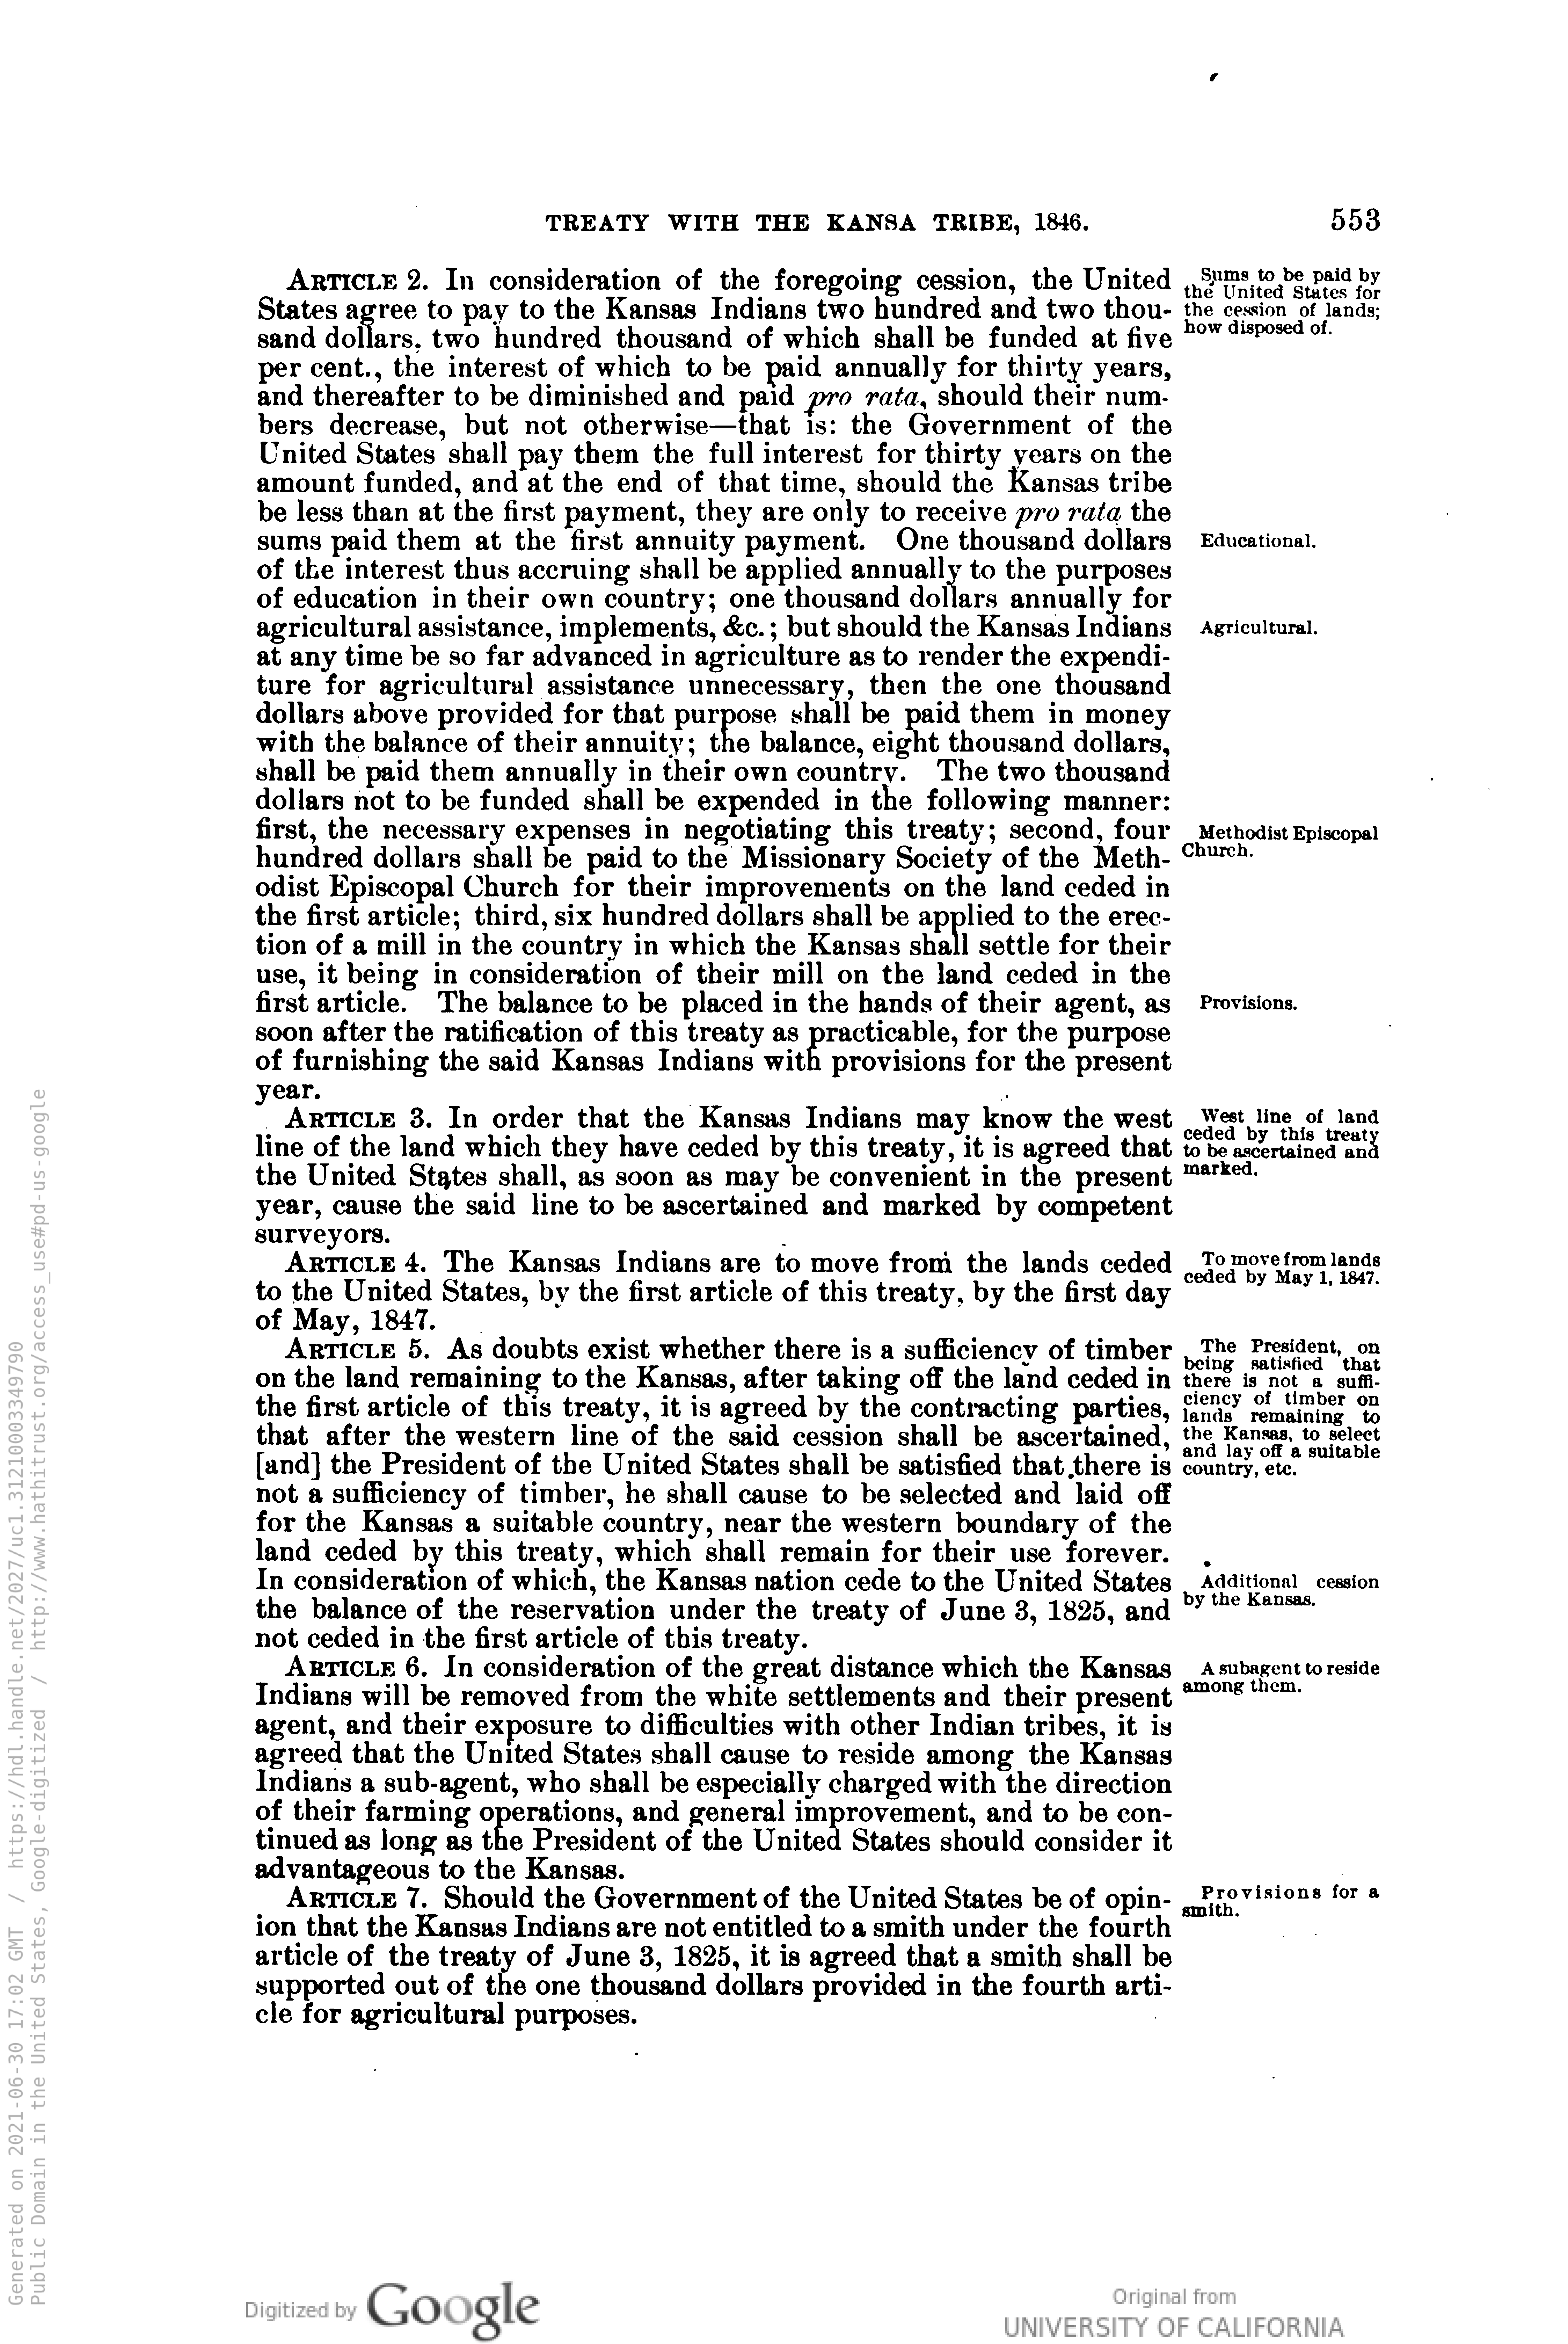 Treaty of 1846, Page 2